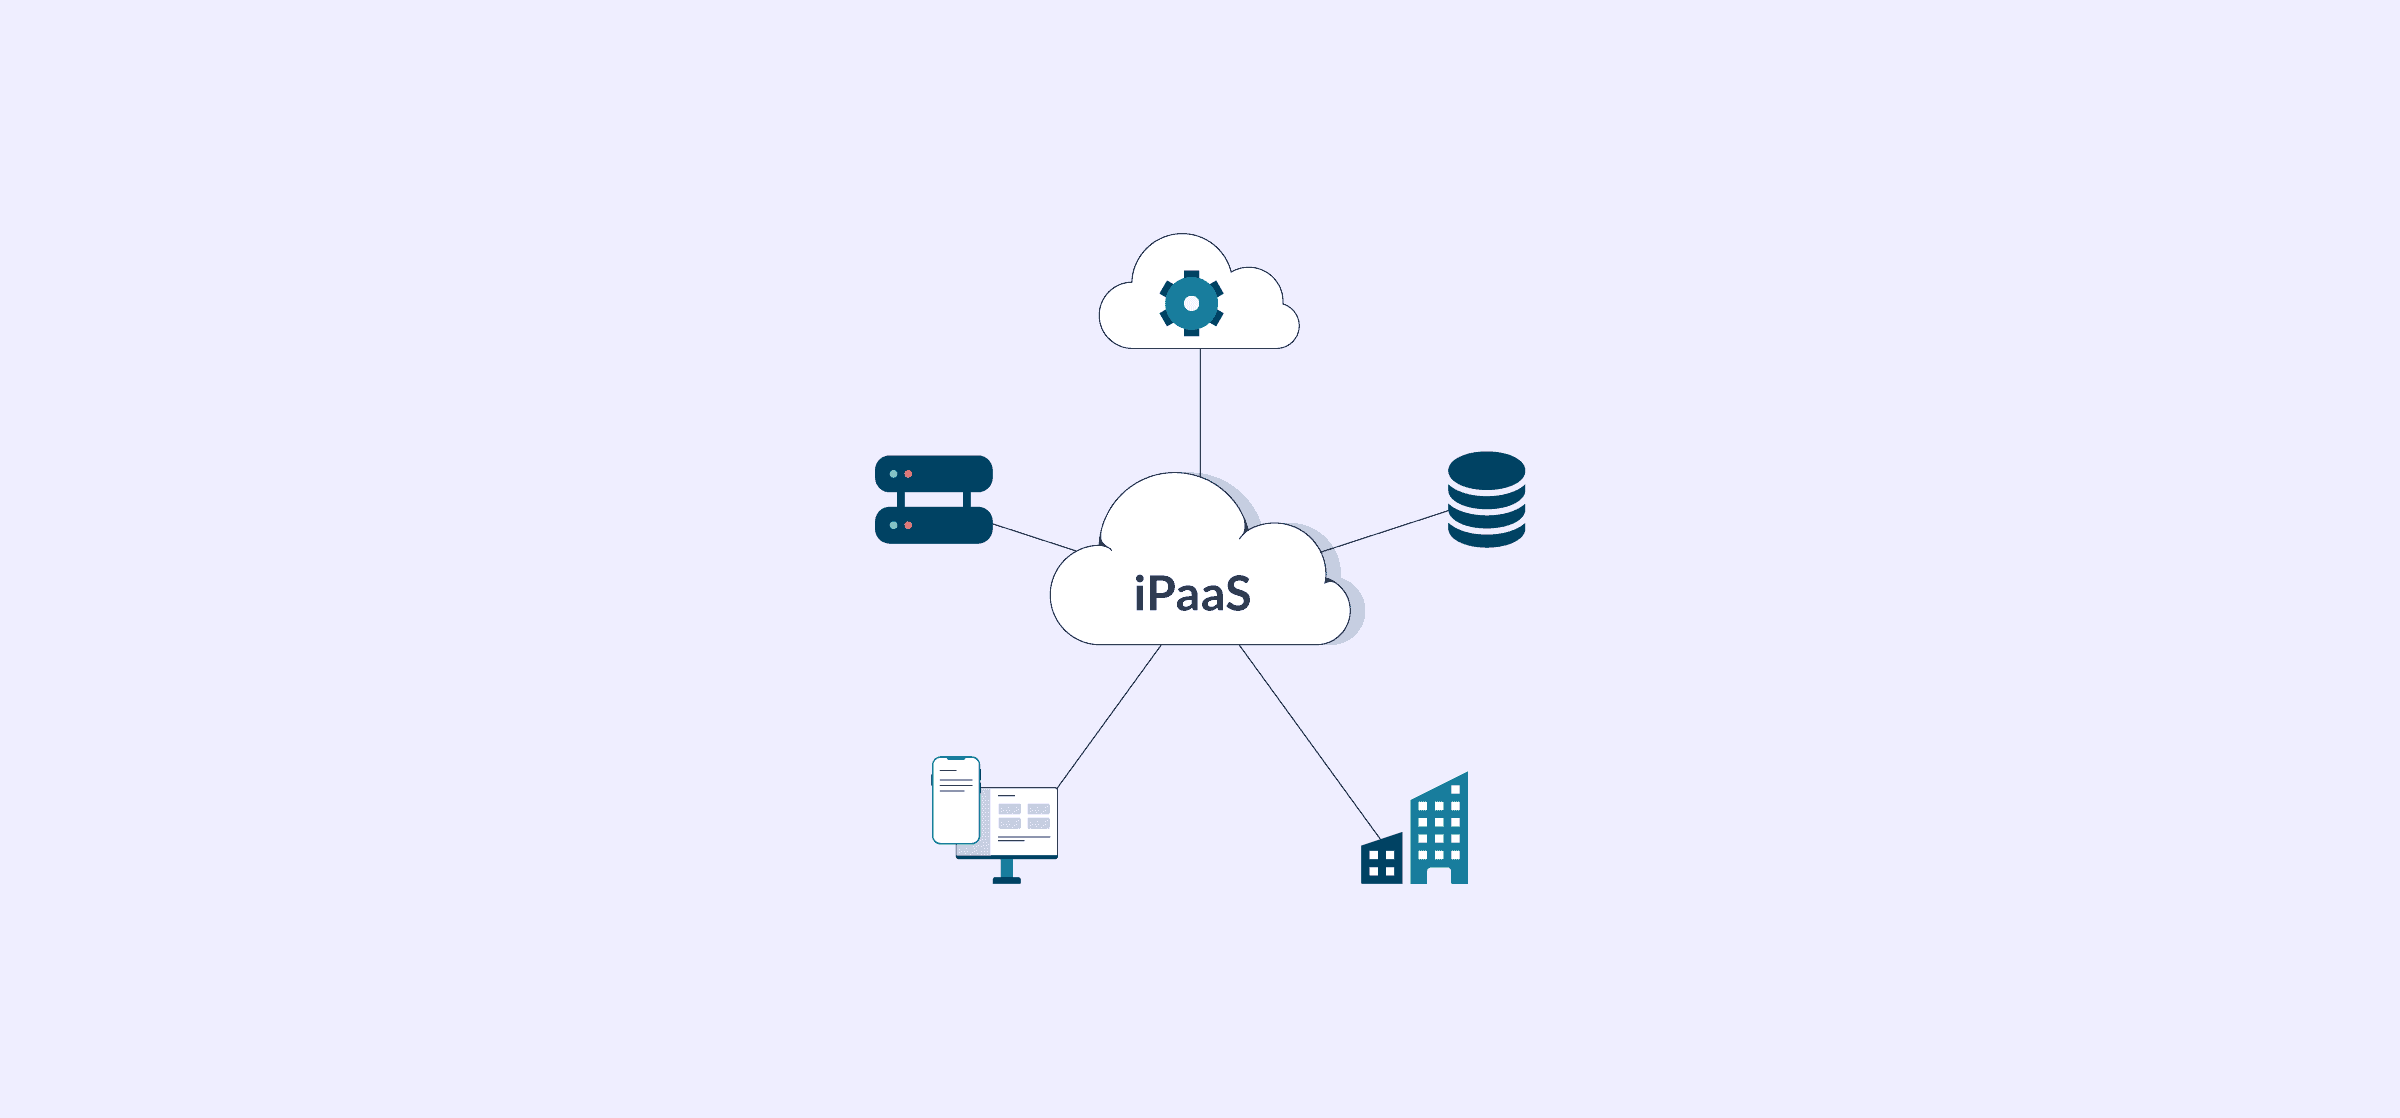 A featured image for Unito's blog post about the best iPaaS software solutions in 2023